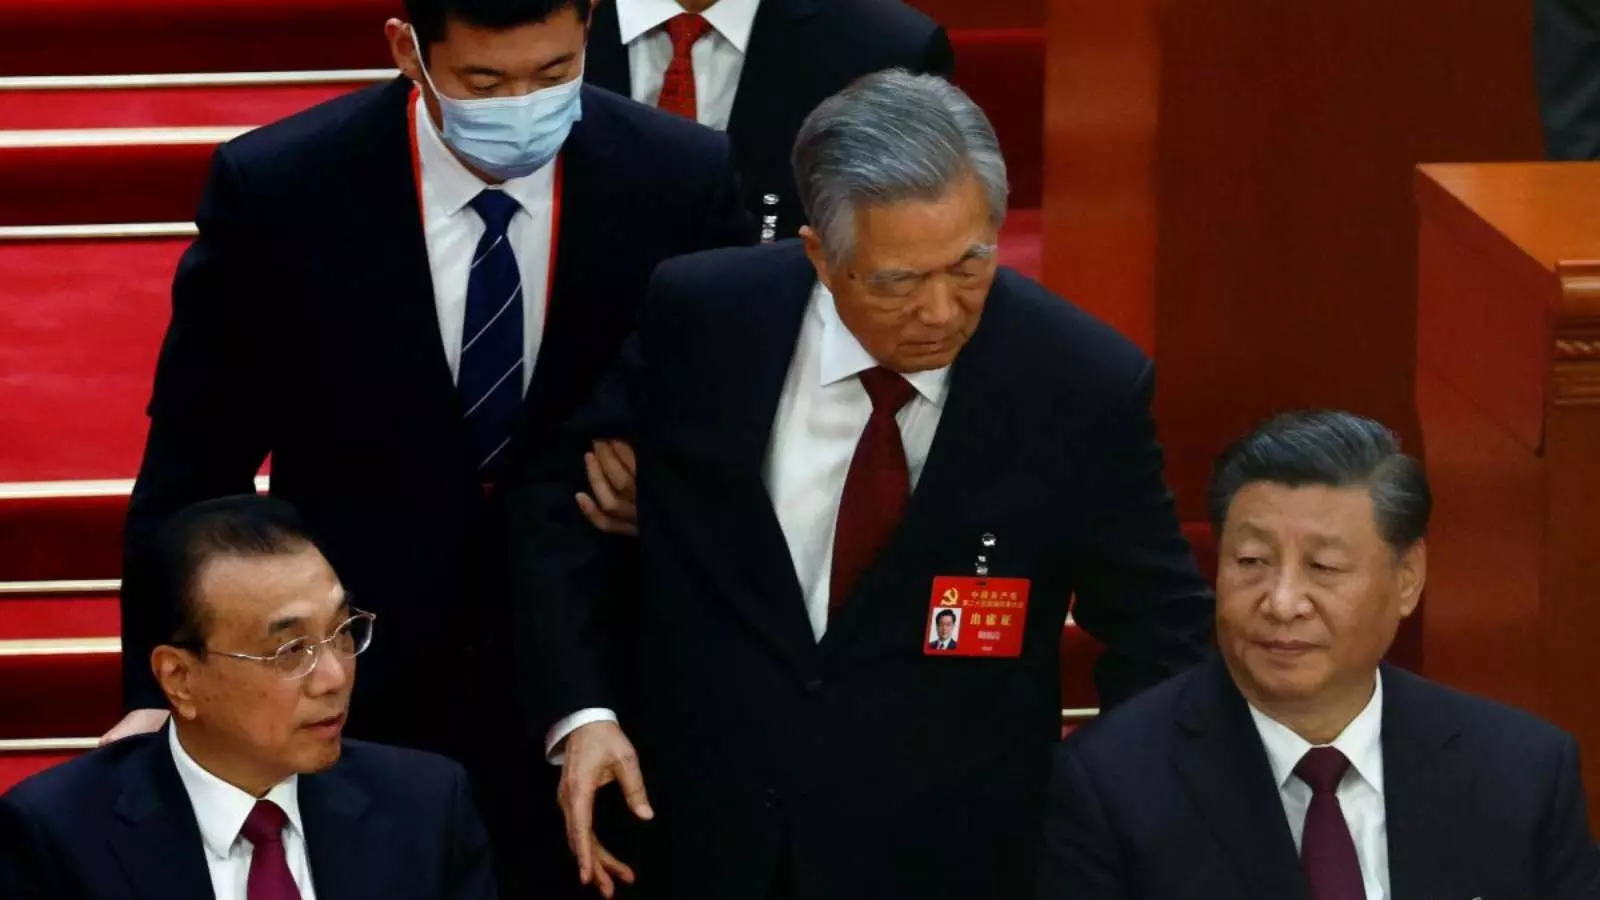 drama in china former president hu jintao has been dragged out of party congress xi jinping